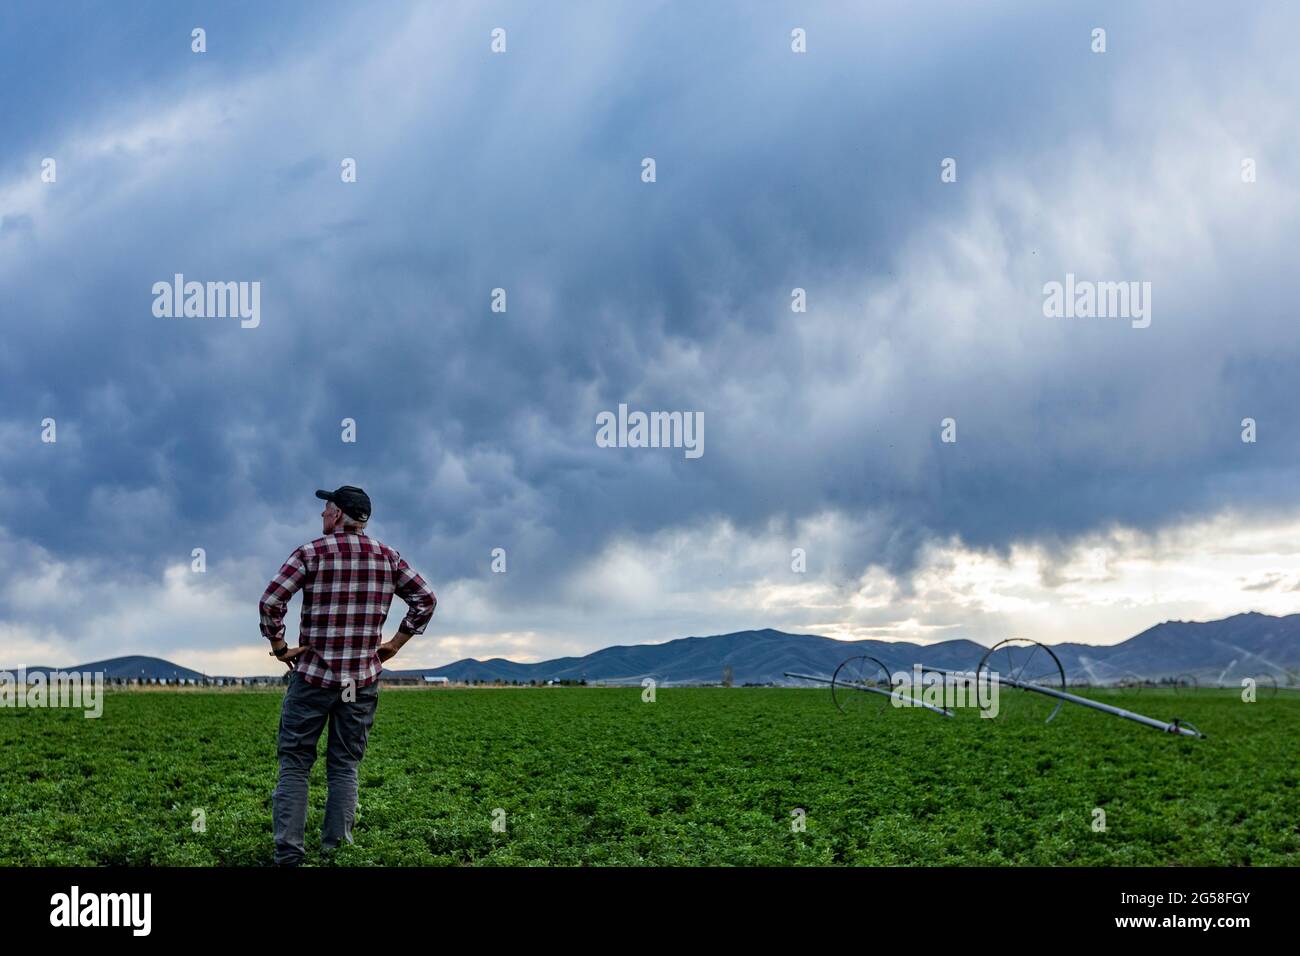 Rear view of farmer standing in field under storm clouds Stock Photo